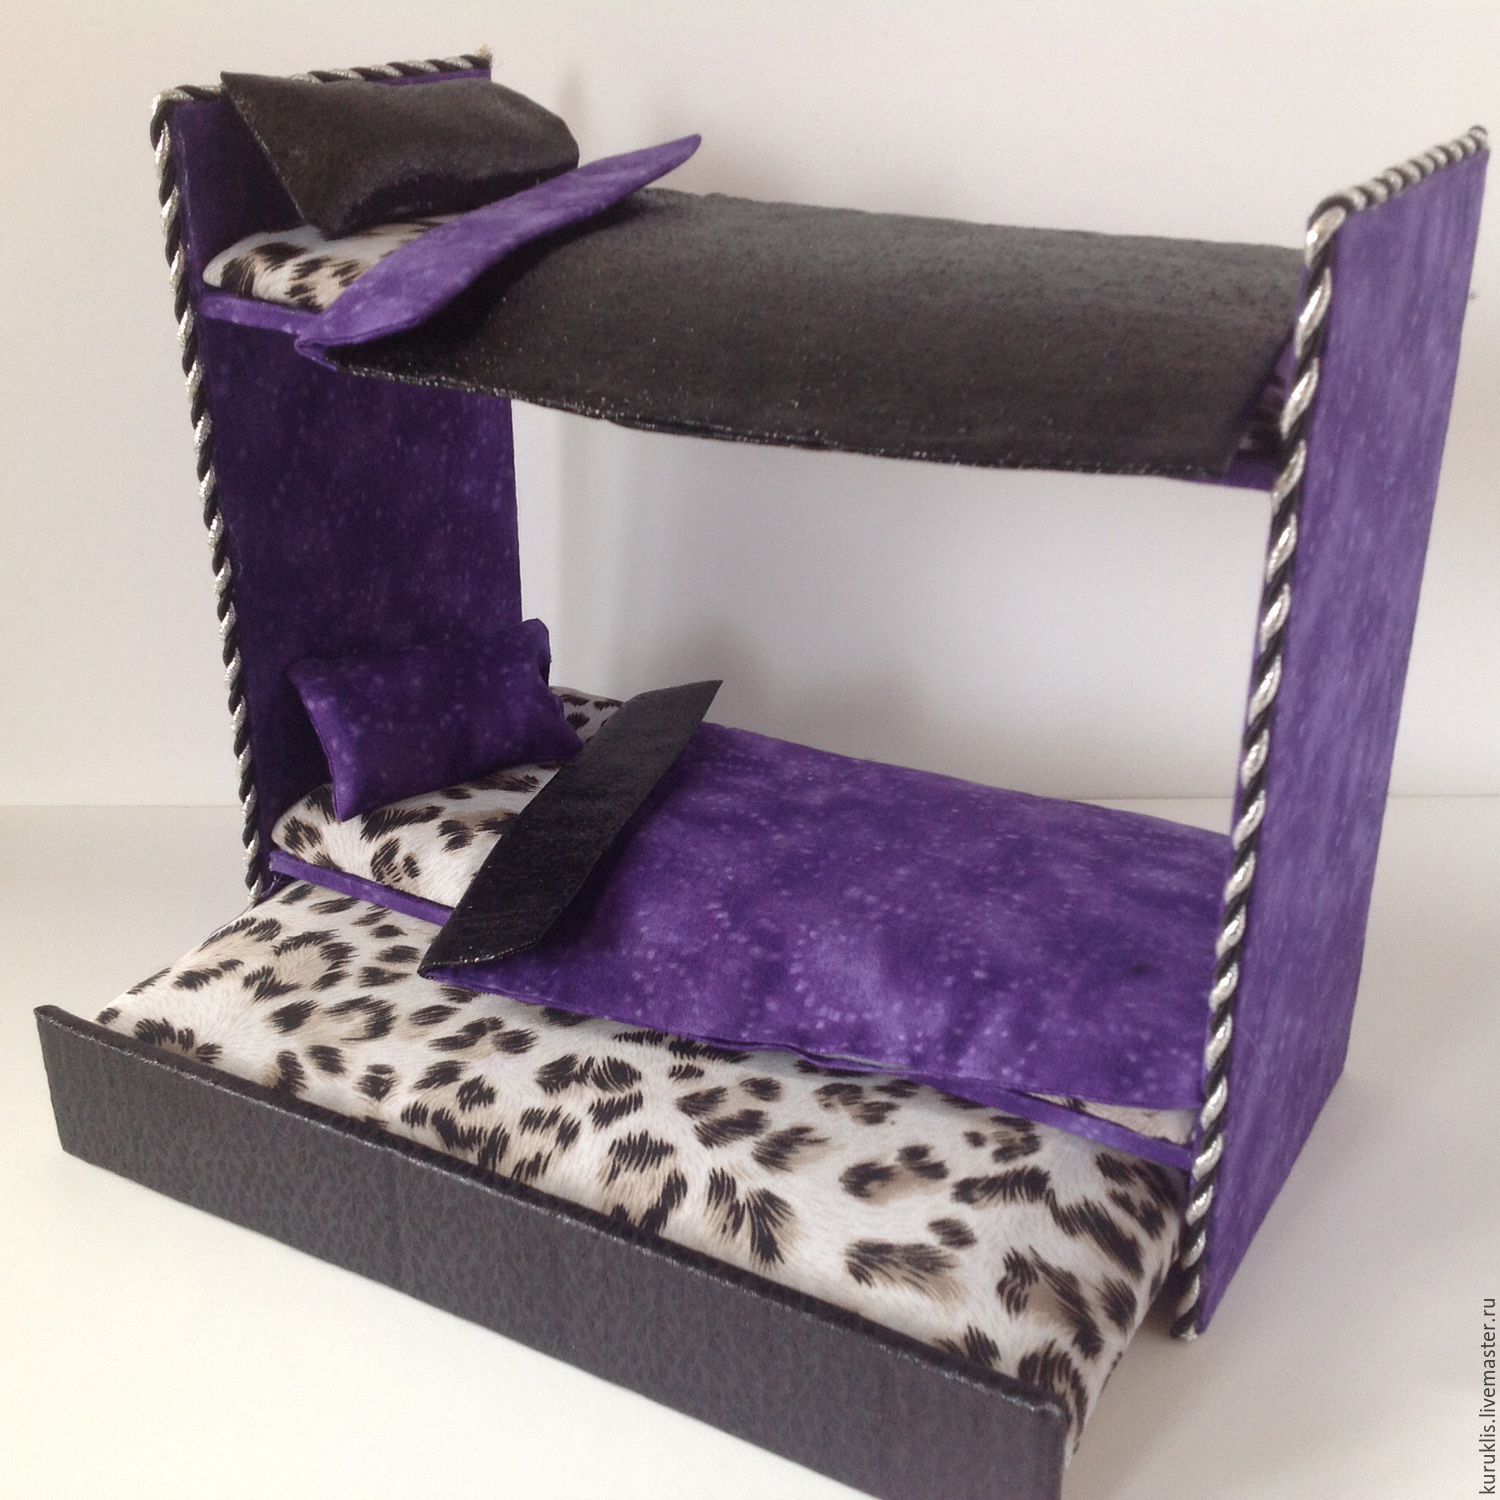 Bunk bed for dolls (three berths)